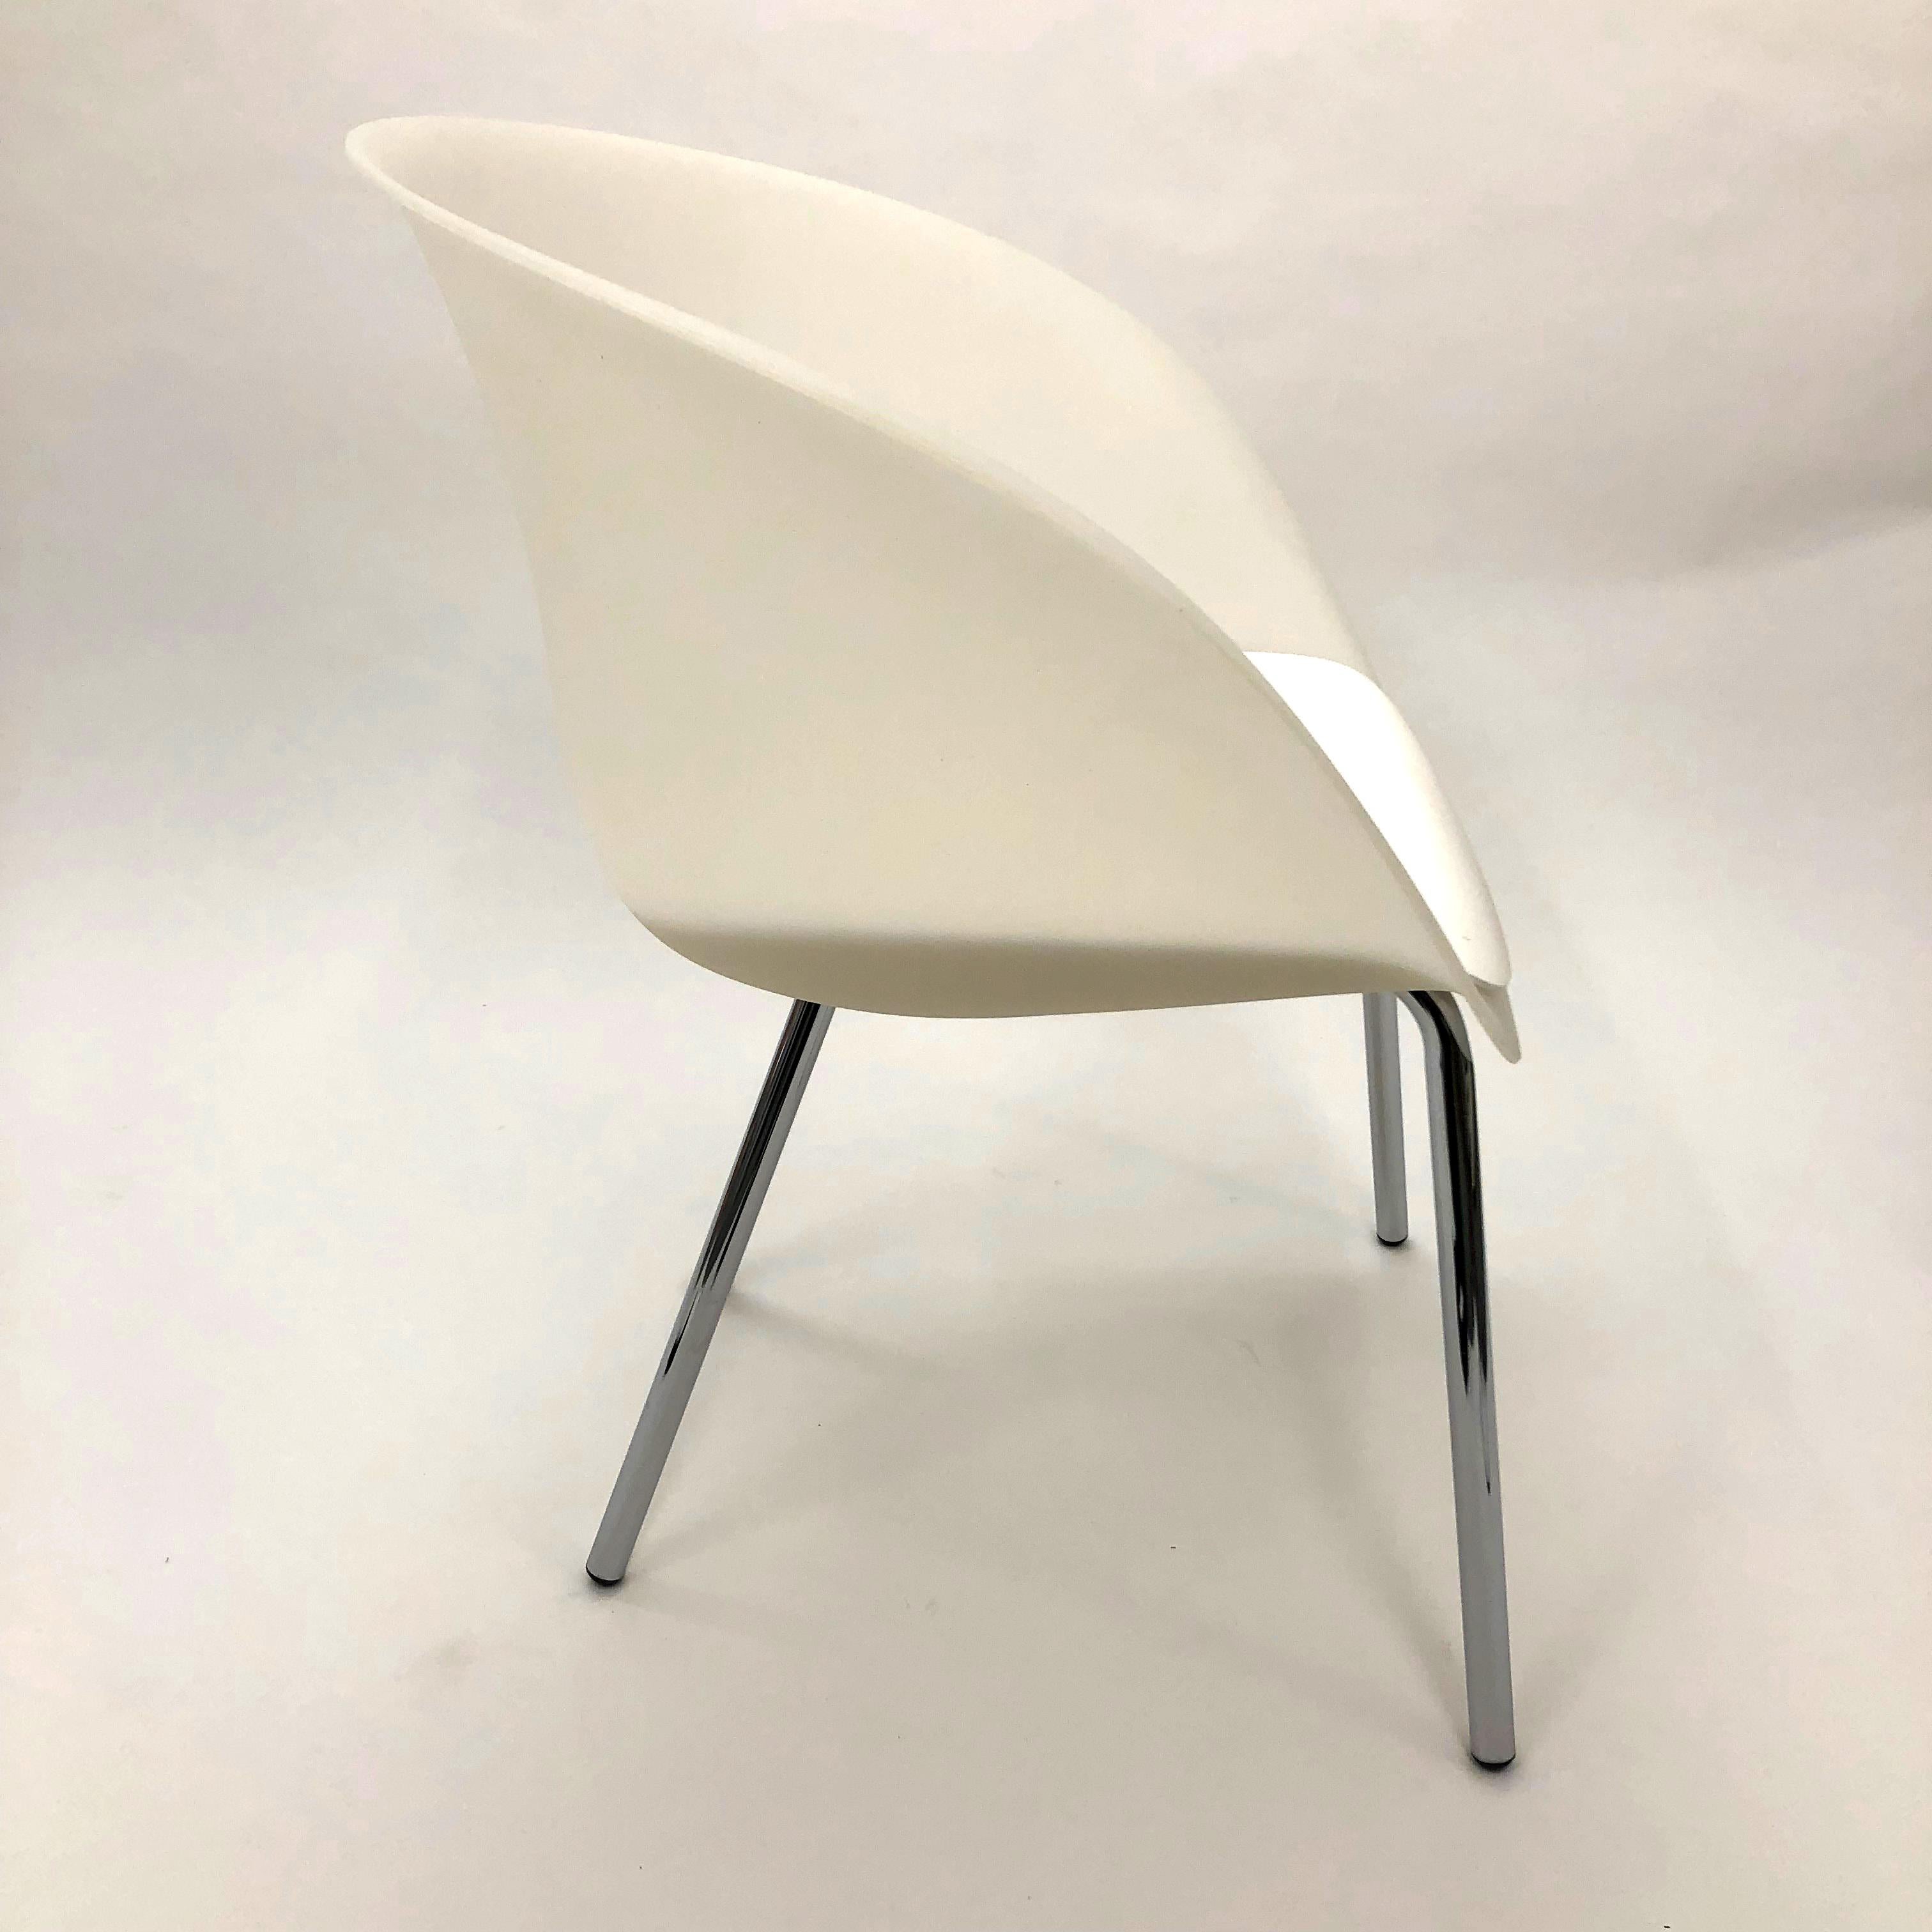 A molded-plastic update on the classic tub chair, the Olo Chair by Andrew Jones for Keilhauer is highly versatile. Ready for use as a side chair, or a conference, reception, or lounge chair. 

This sculptural, flowing translucent polypropylene